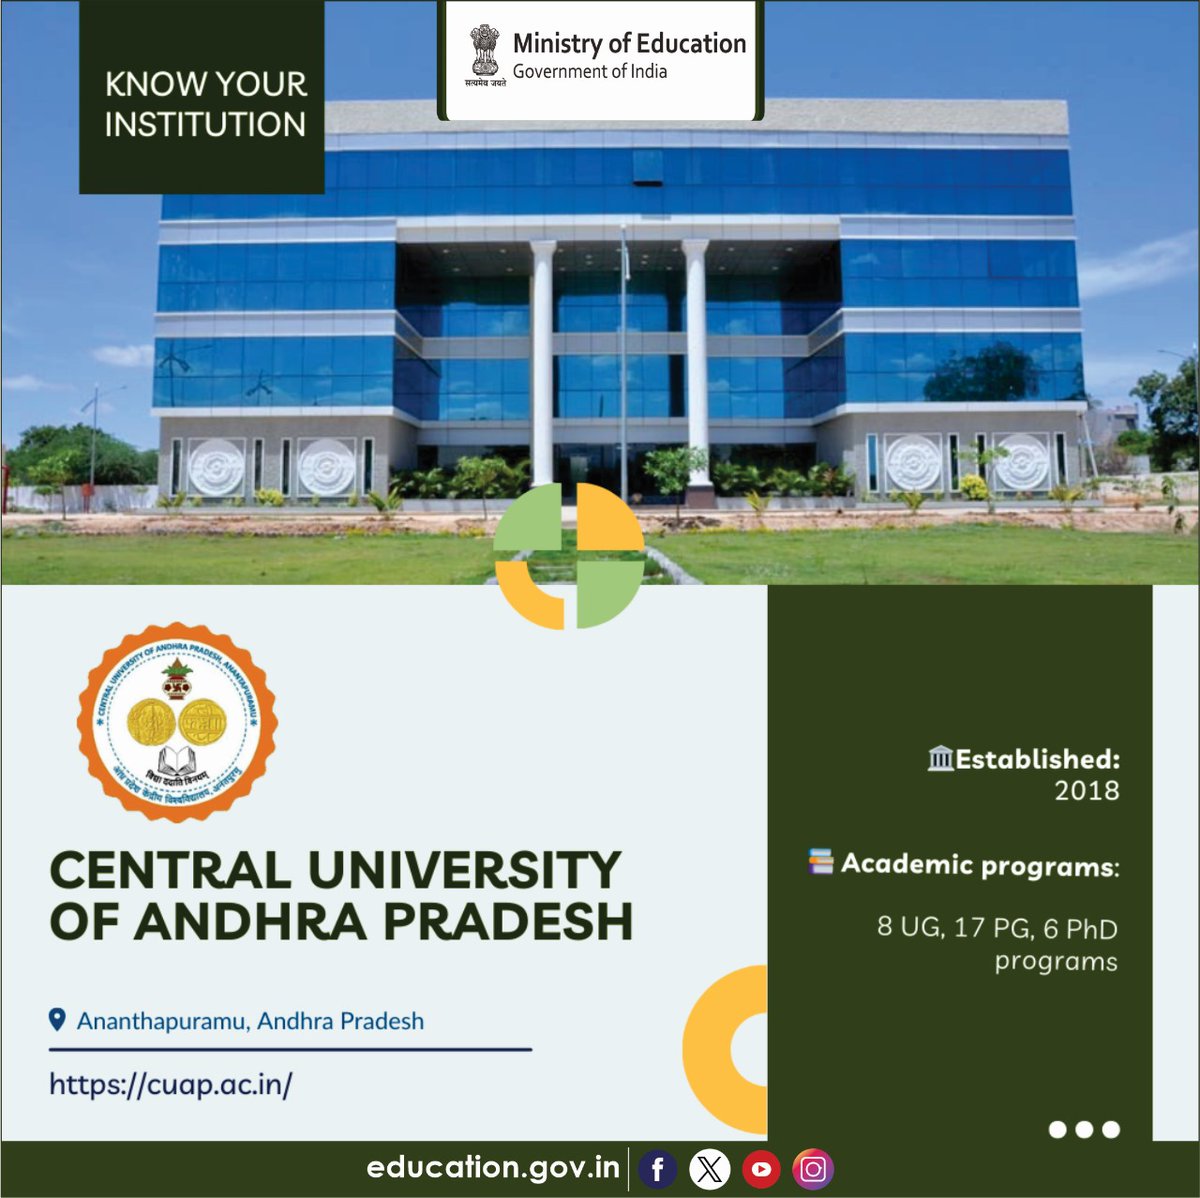 Know about the HEIs of India! Established in 2018 in Ananthapuramu, the Central University of Andhra Pradesh is a newly established institution with a vision to provide access to quality education. Its curriculum includes multidisciplinary and skill development courses, along